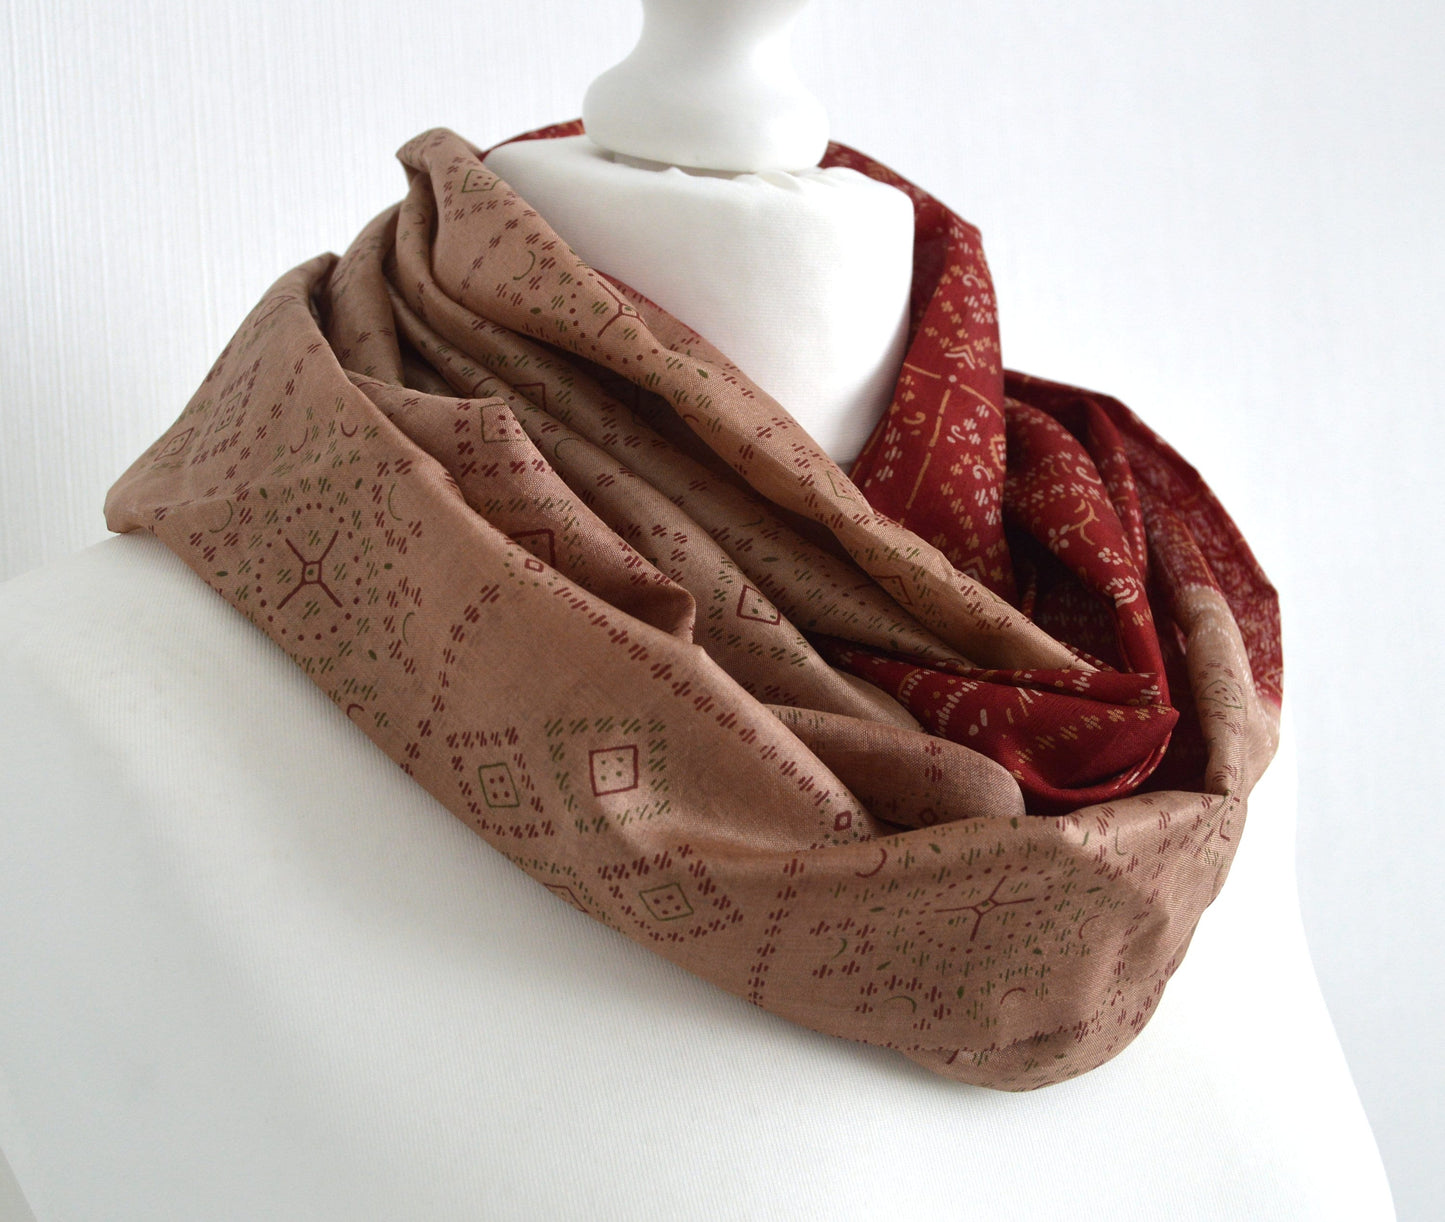 Deep Red Beige Sari Silk Scarf - Bohemian Eco Friendly Unisex Womens Scarf - Autumn Fall Winter Trend Christmas Gift For Her or Him